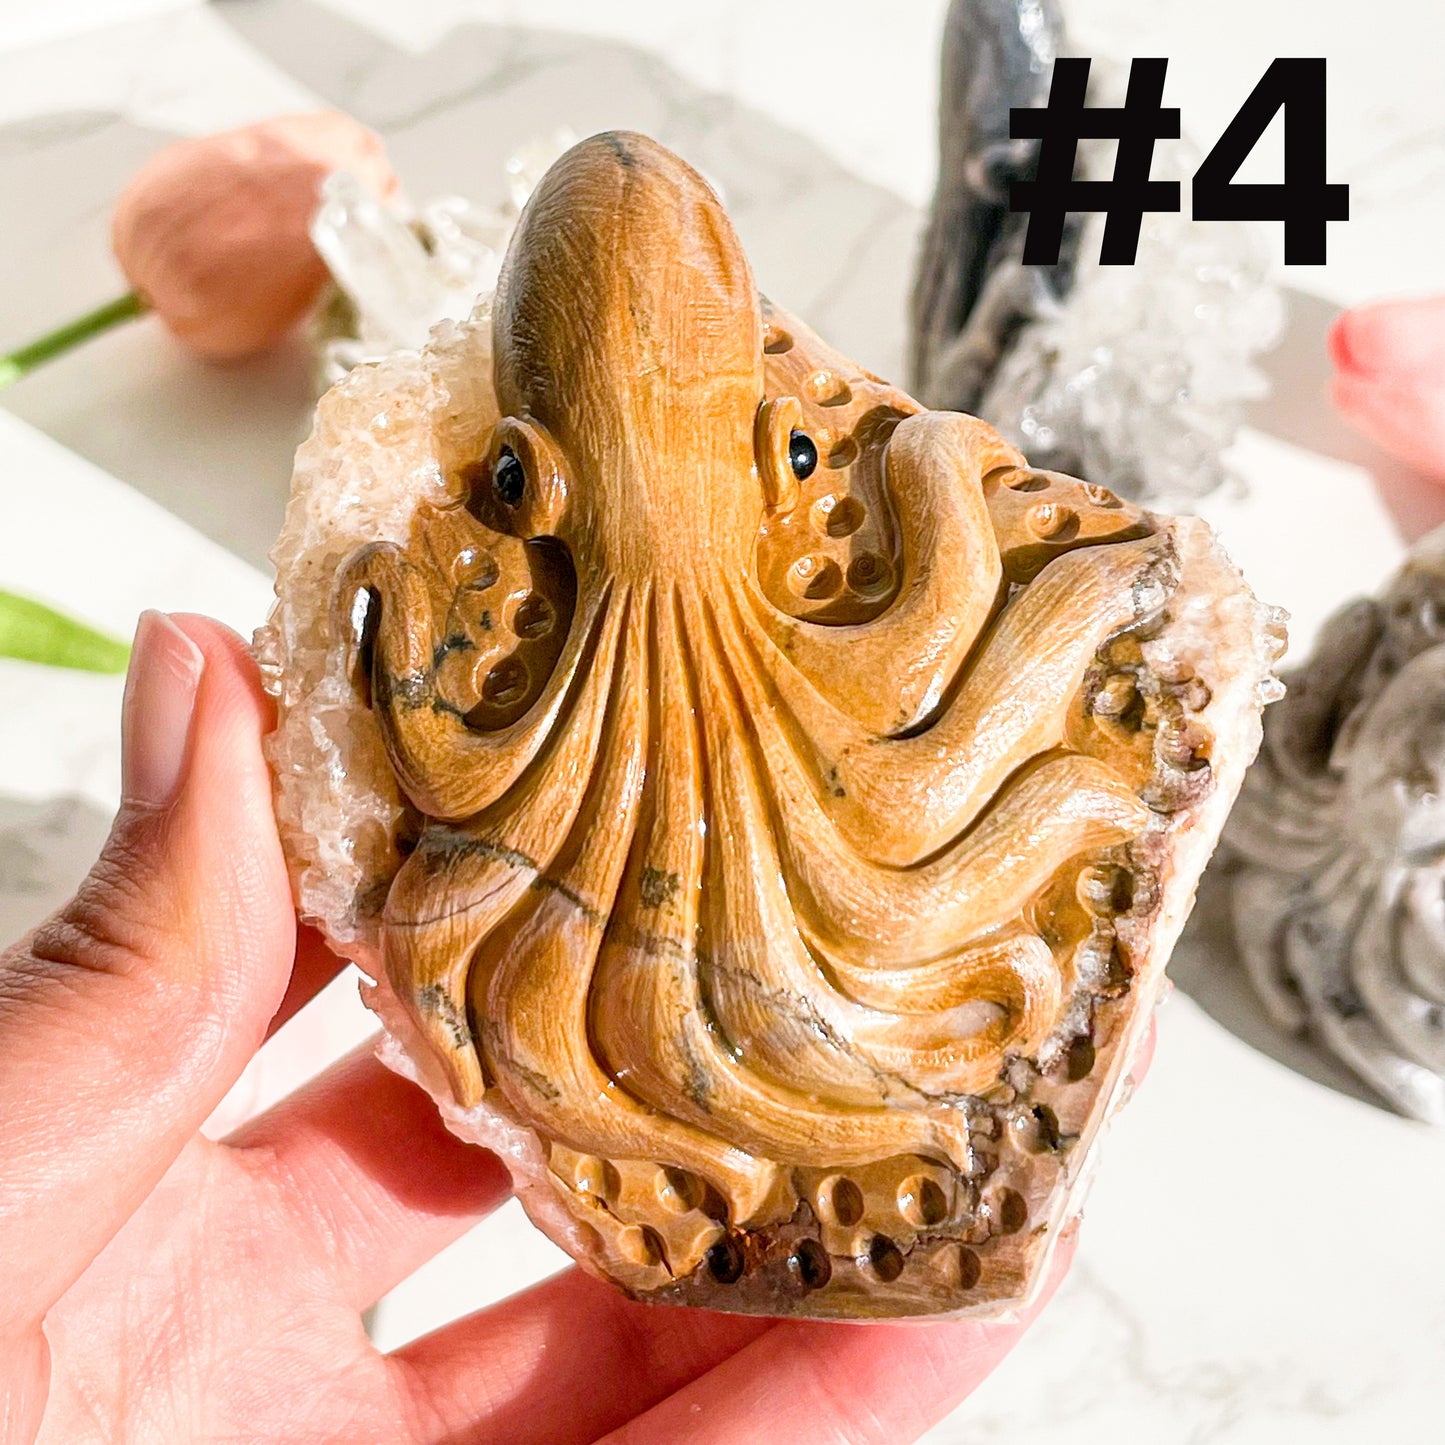 Octopus carving